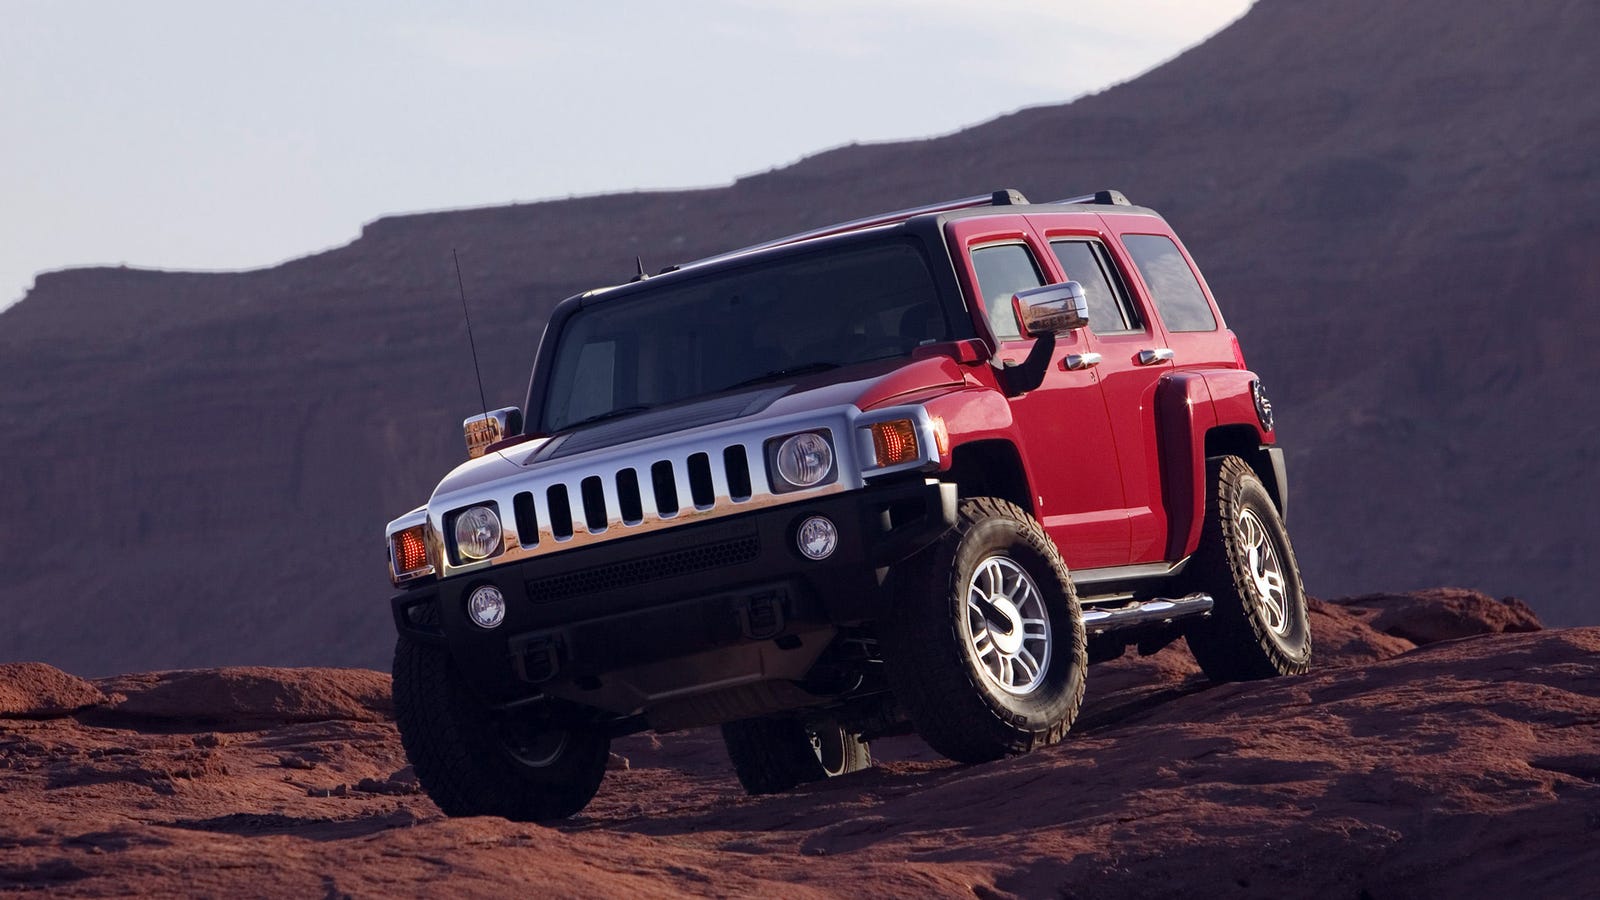 Hummer Could Come Back As An All-Electric Brand: Report